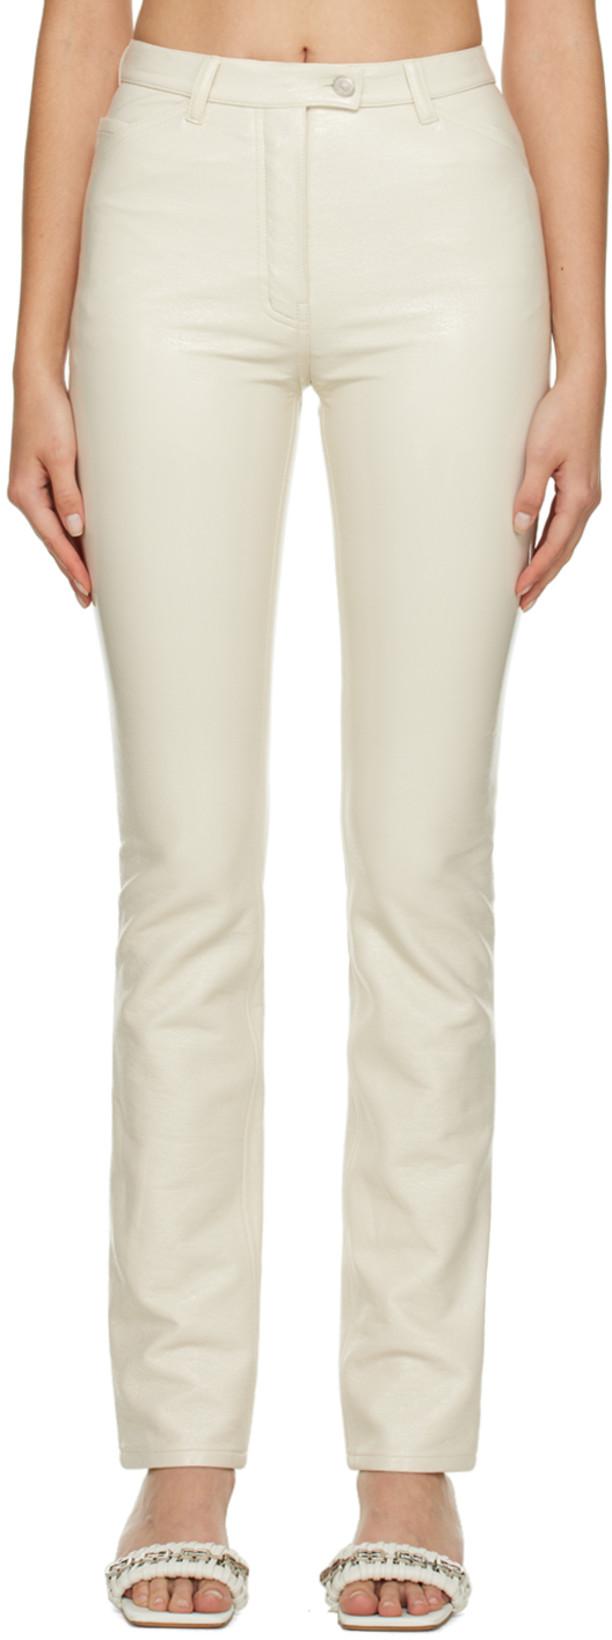 Off-White Slim-Fit Trousers by COURREGES